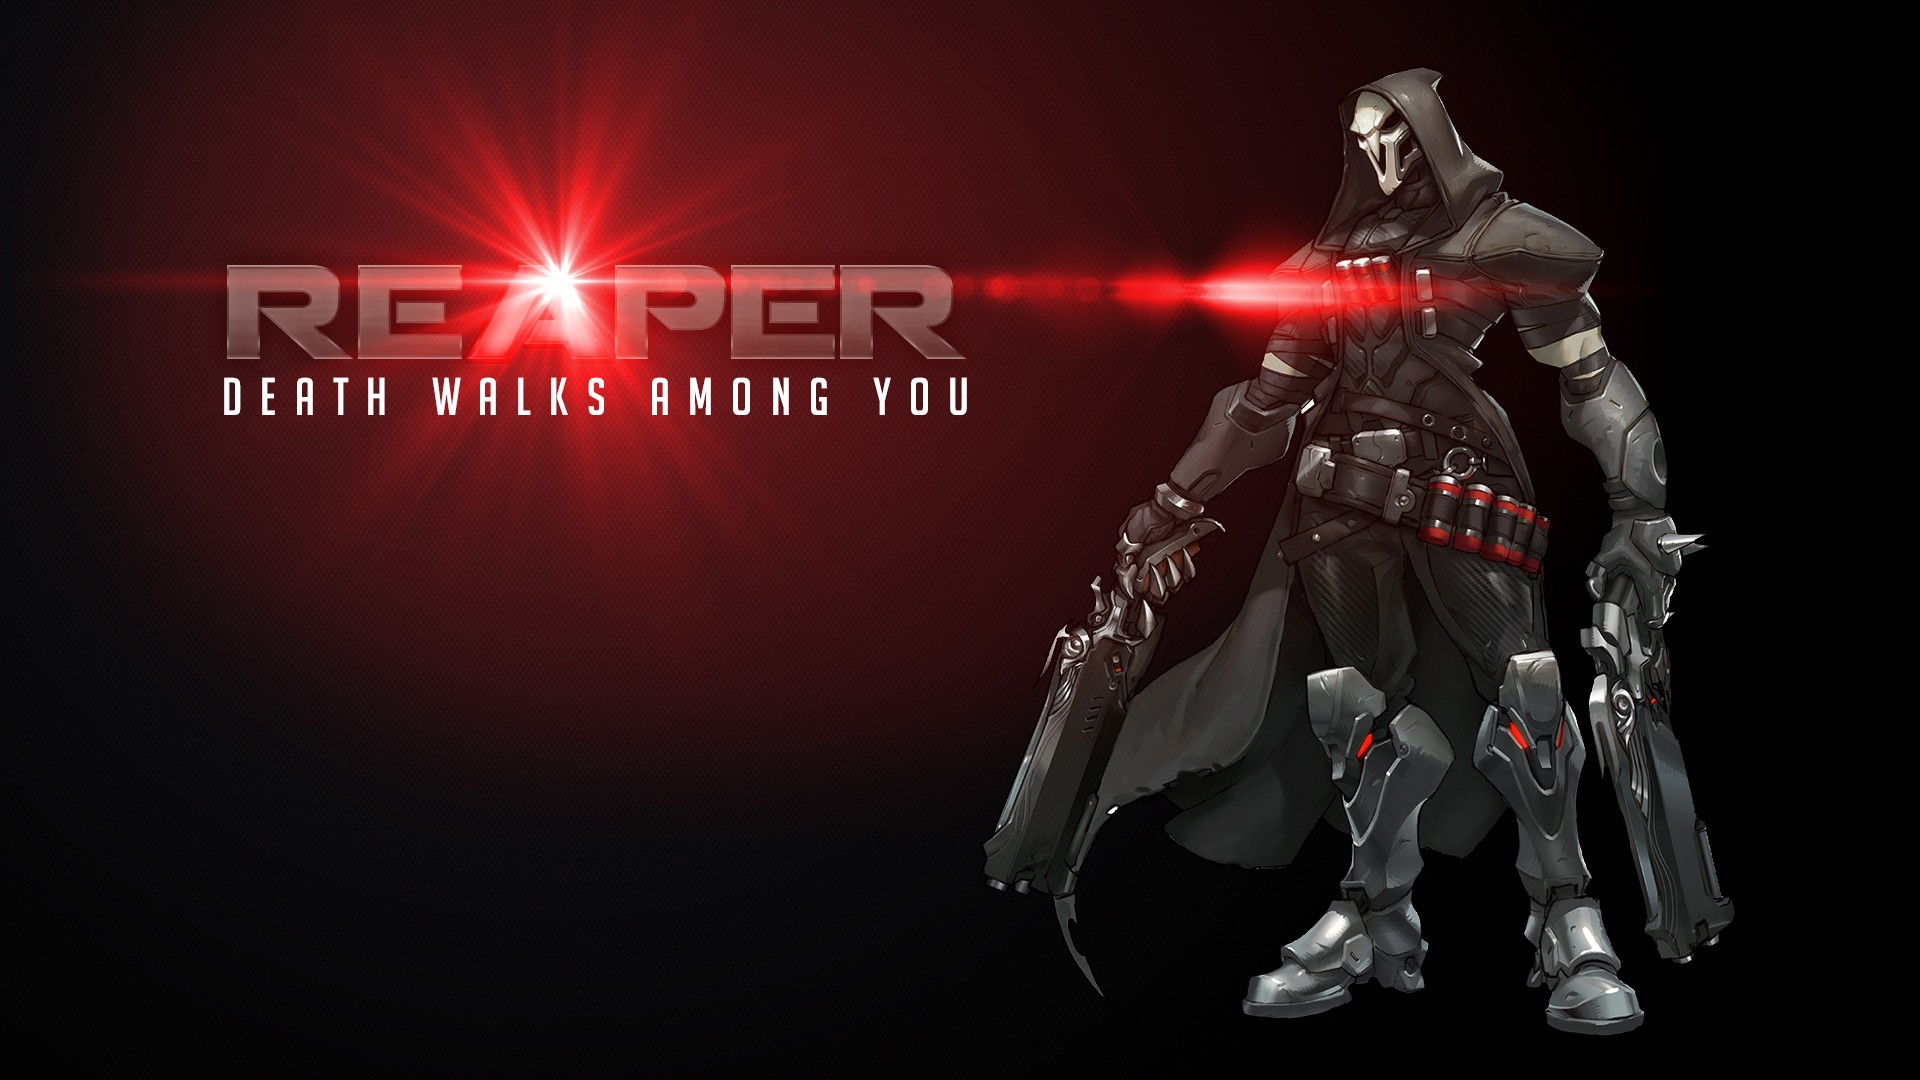 1920x1080 Wallpaper : Reaper Overwatch, Blizzard Entertainment, darkness, px, computer wallpaper, action figure CoolWallpapers 827120 HD Wallpapers